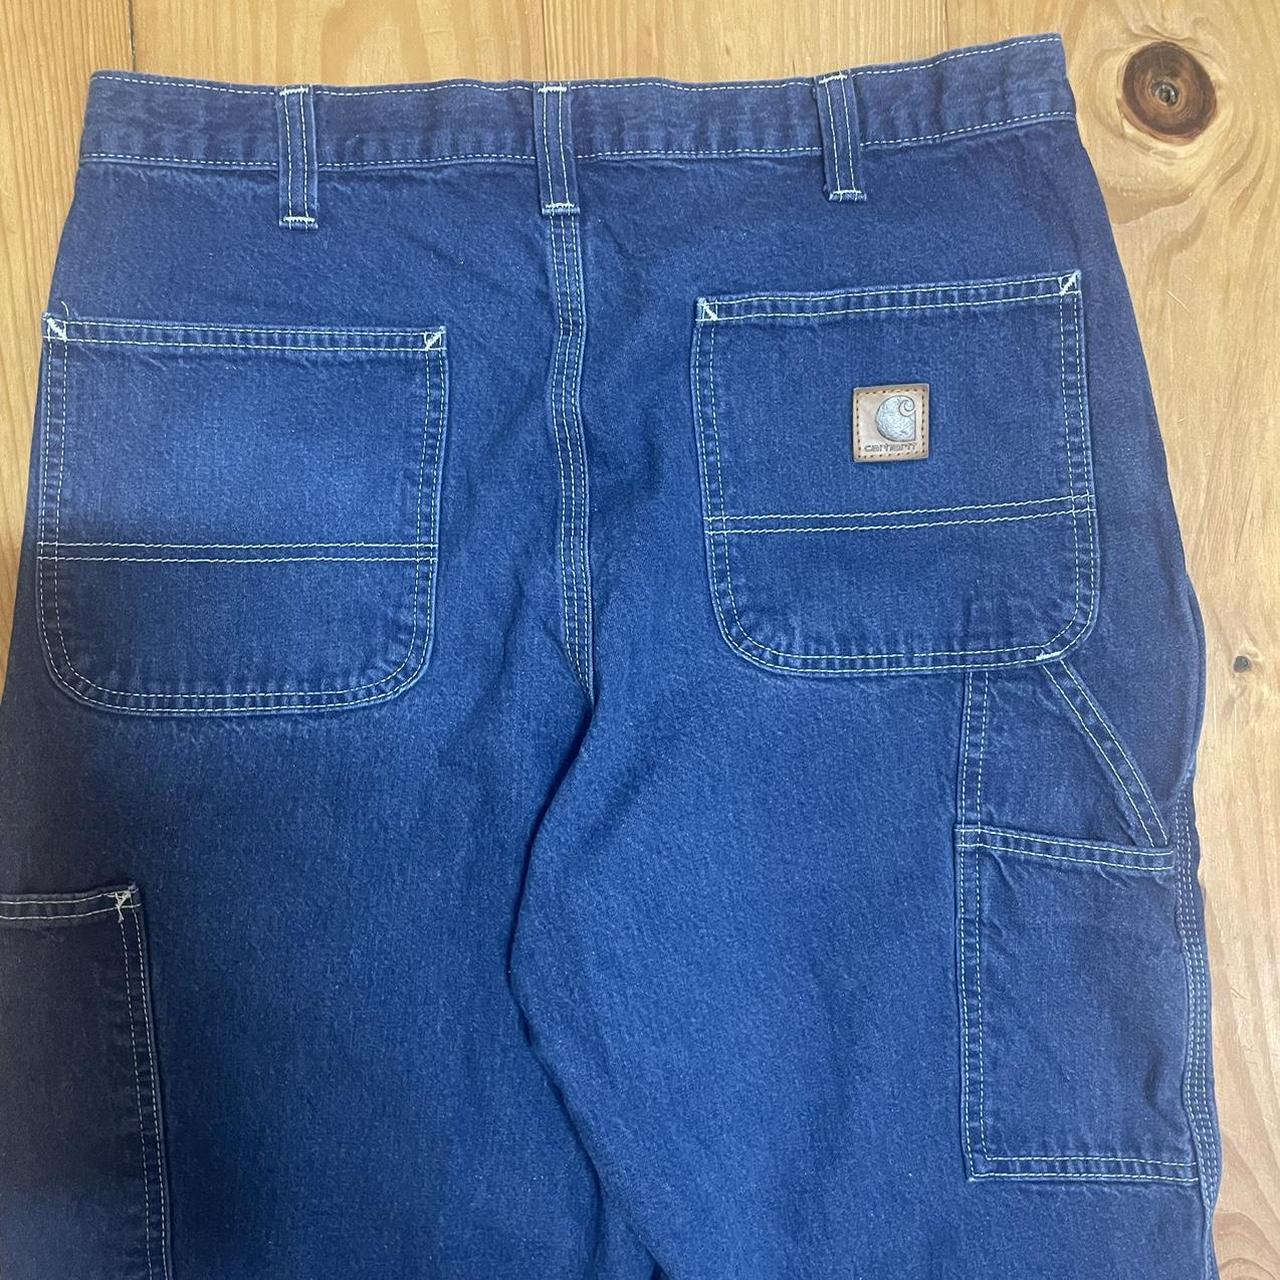 Vintage carhartt jeans white stitching leather tab... - Depop